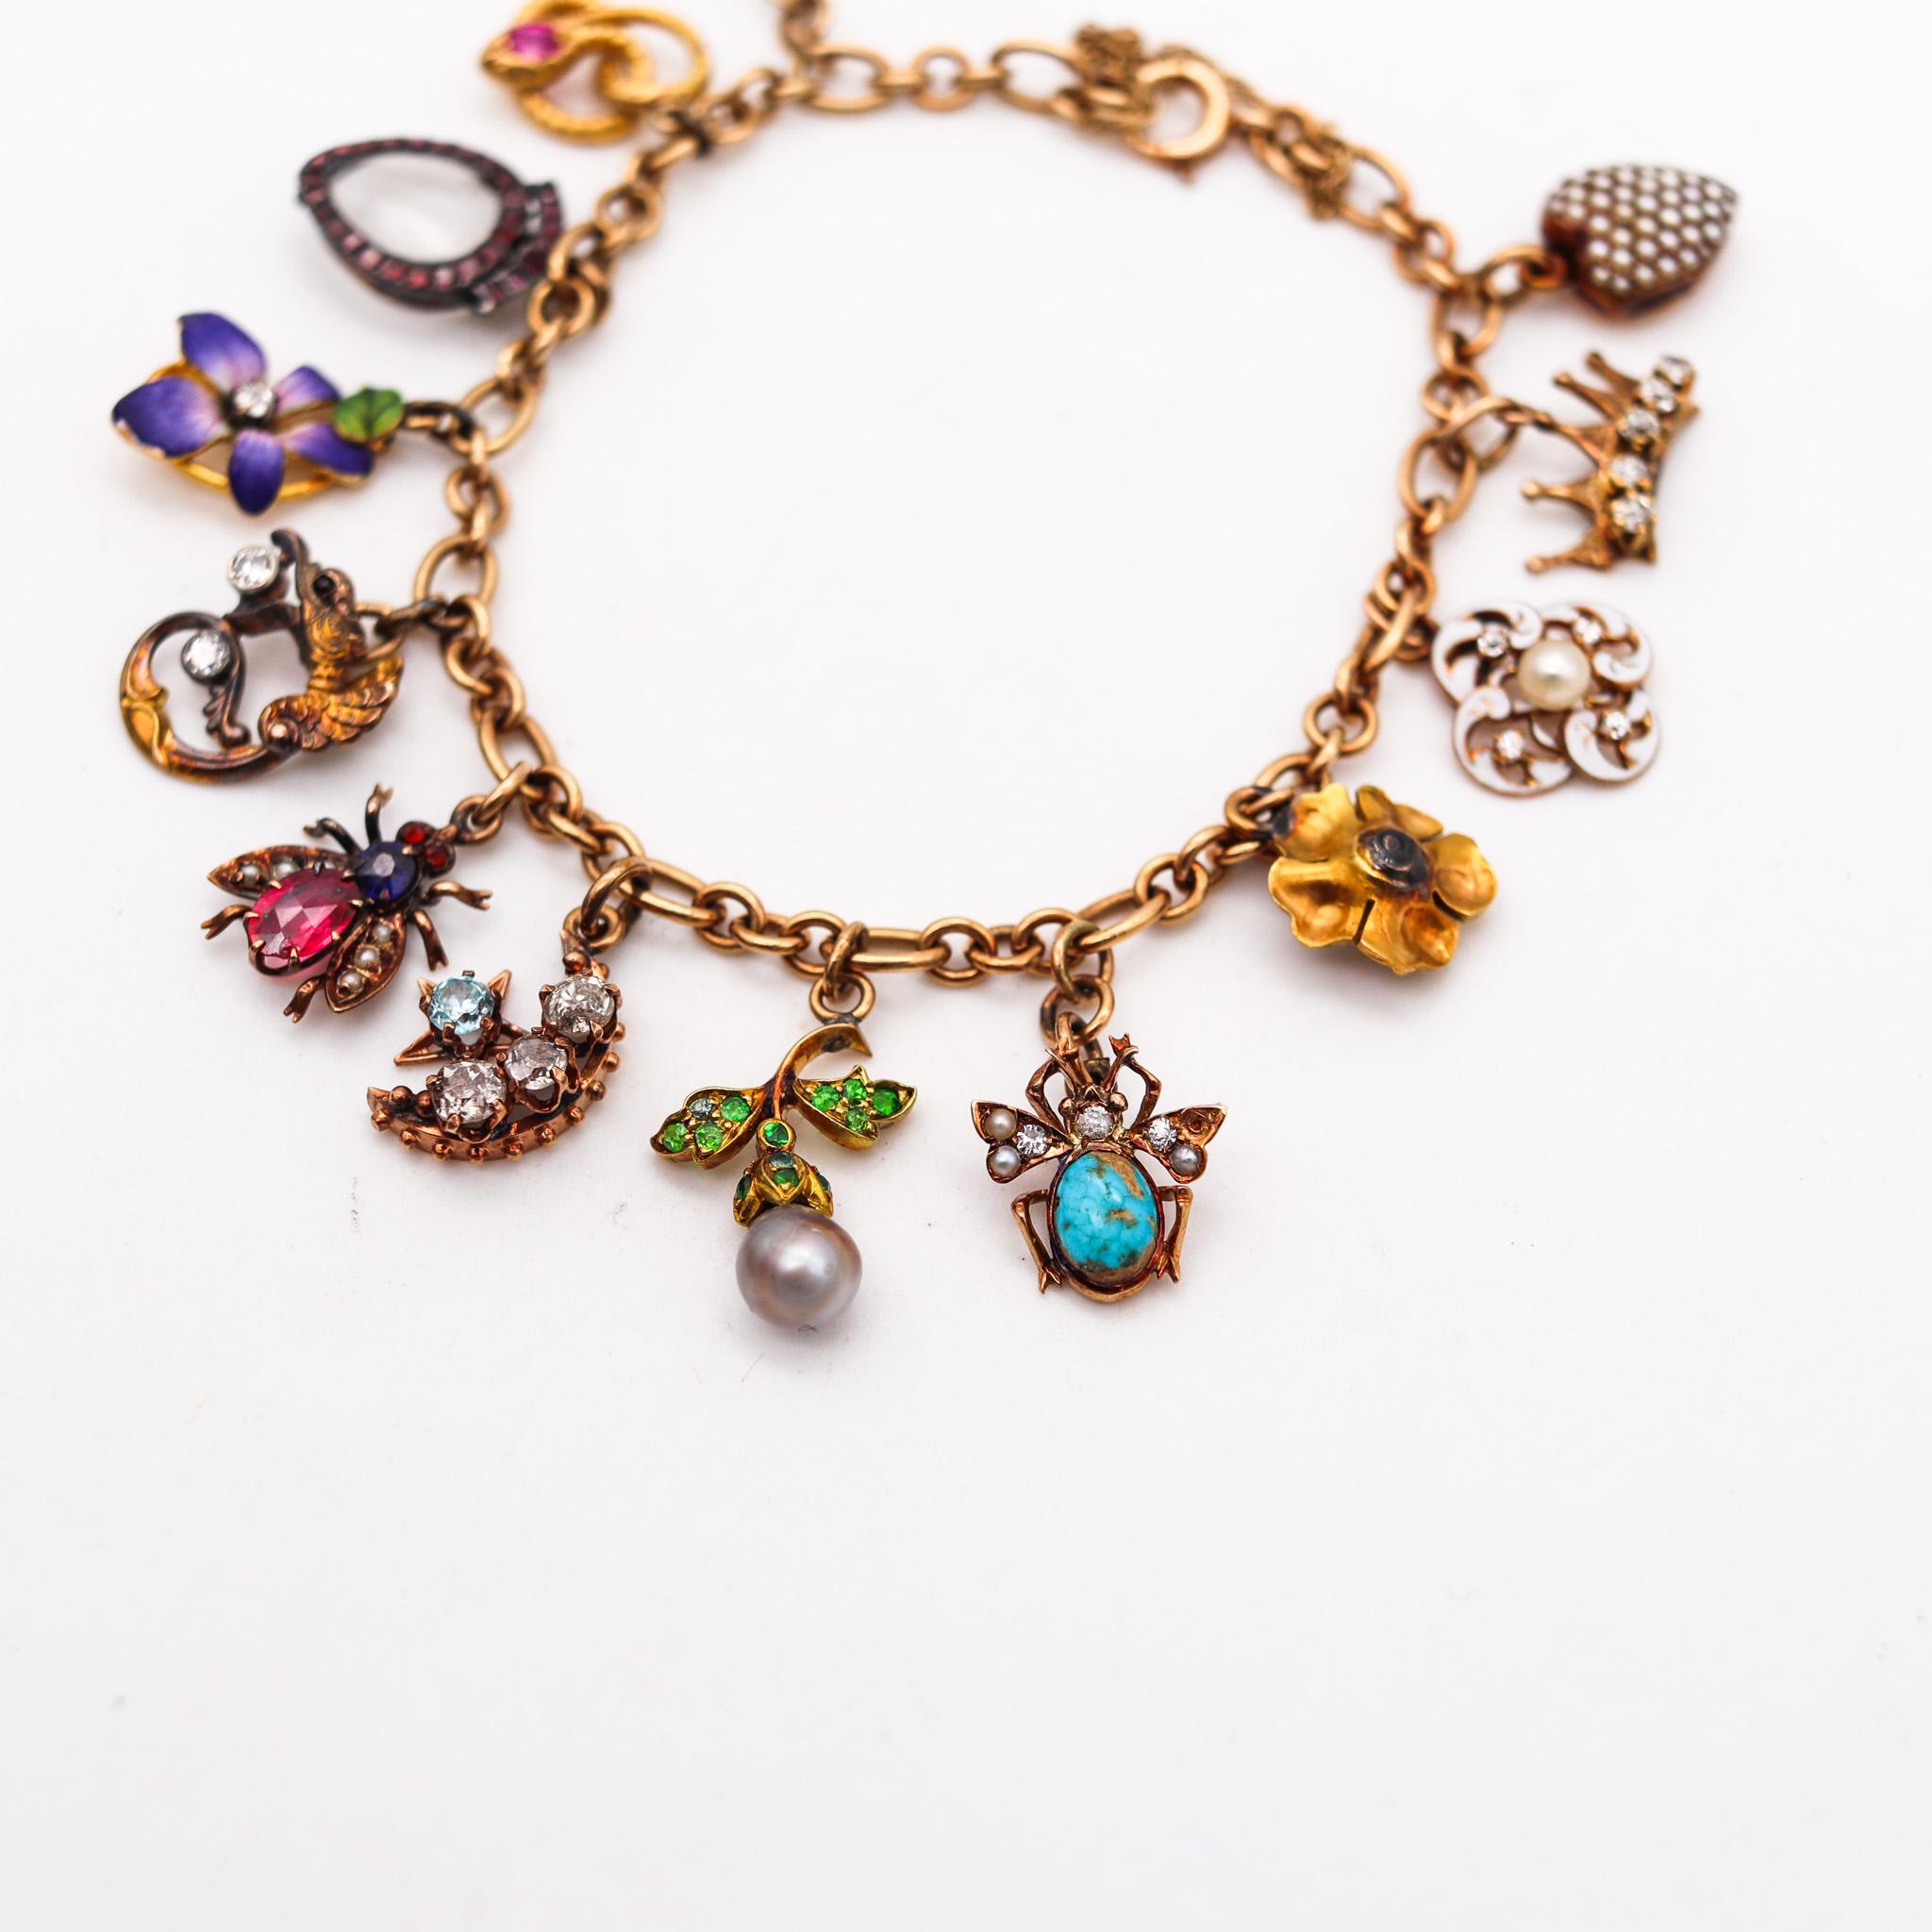 Mixed Cut Art Nouveau 1910 Charms Bracelet In 14Kt Gold With Multi Gemstones And Enamels For Sale